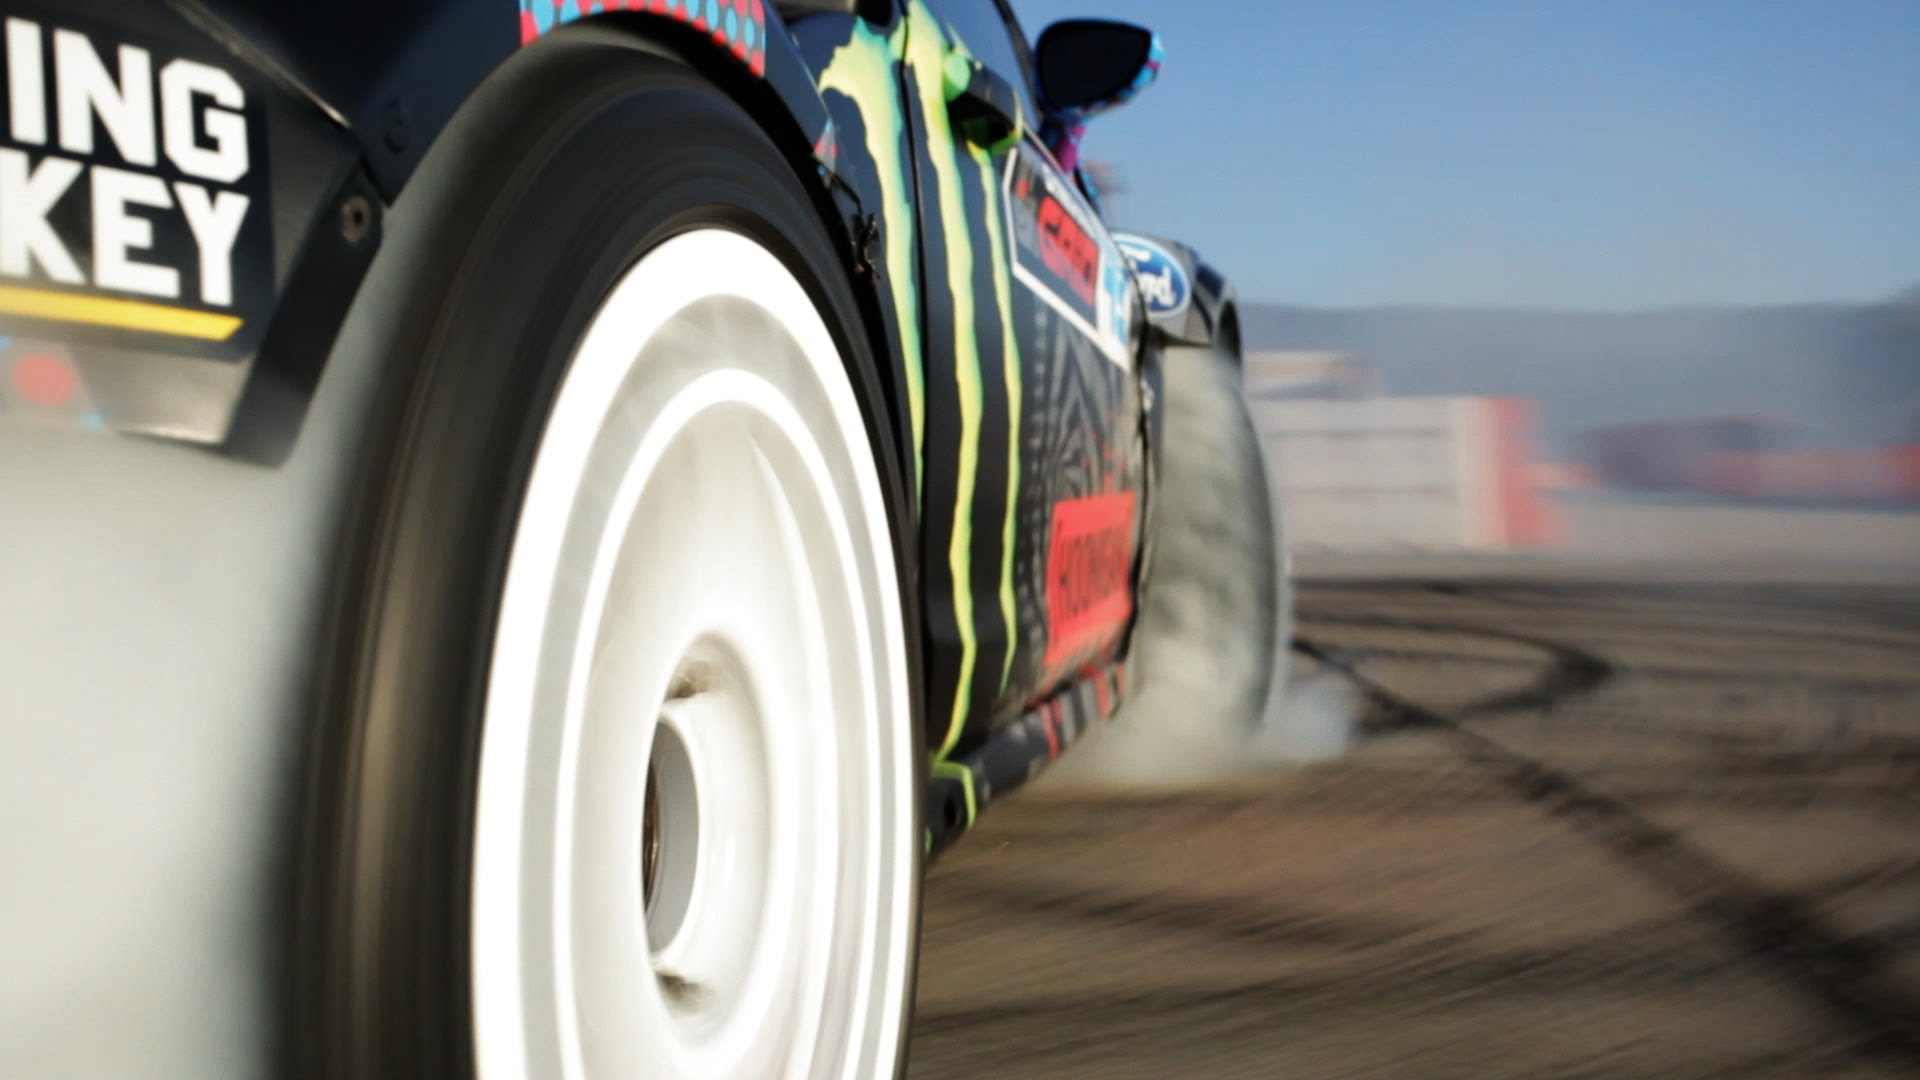 NEED FOR SPEED: KEN BLOCK’S GYMKHANA SIX – THE TEASE